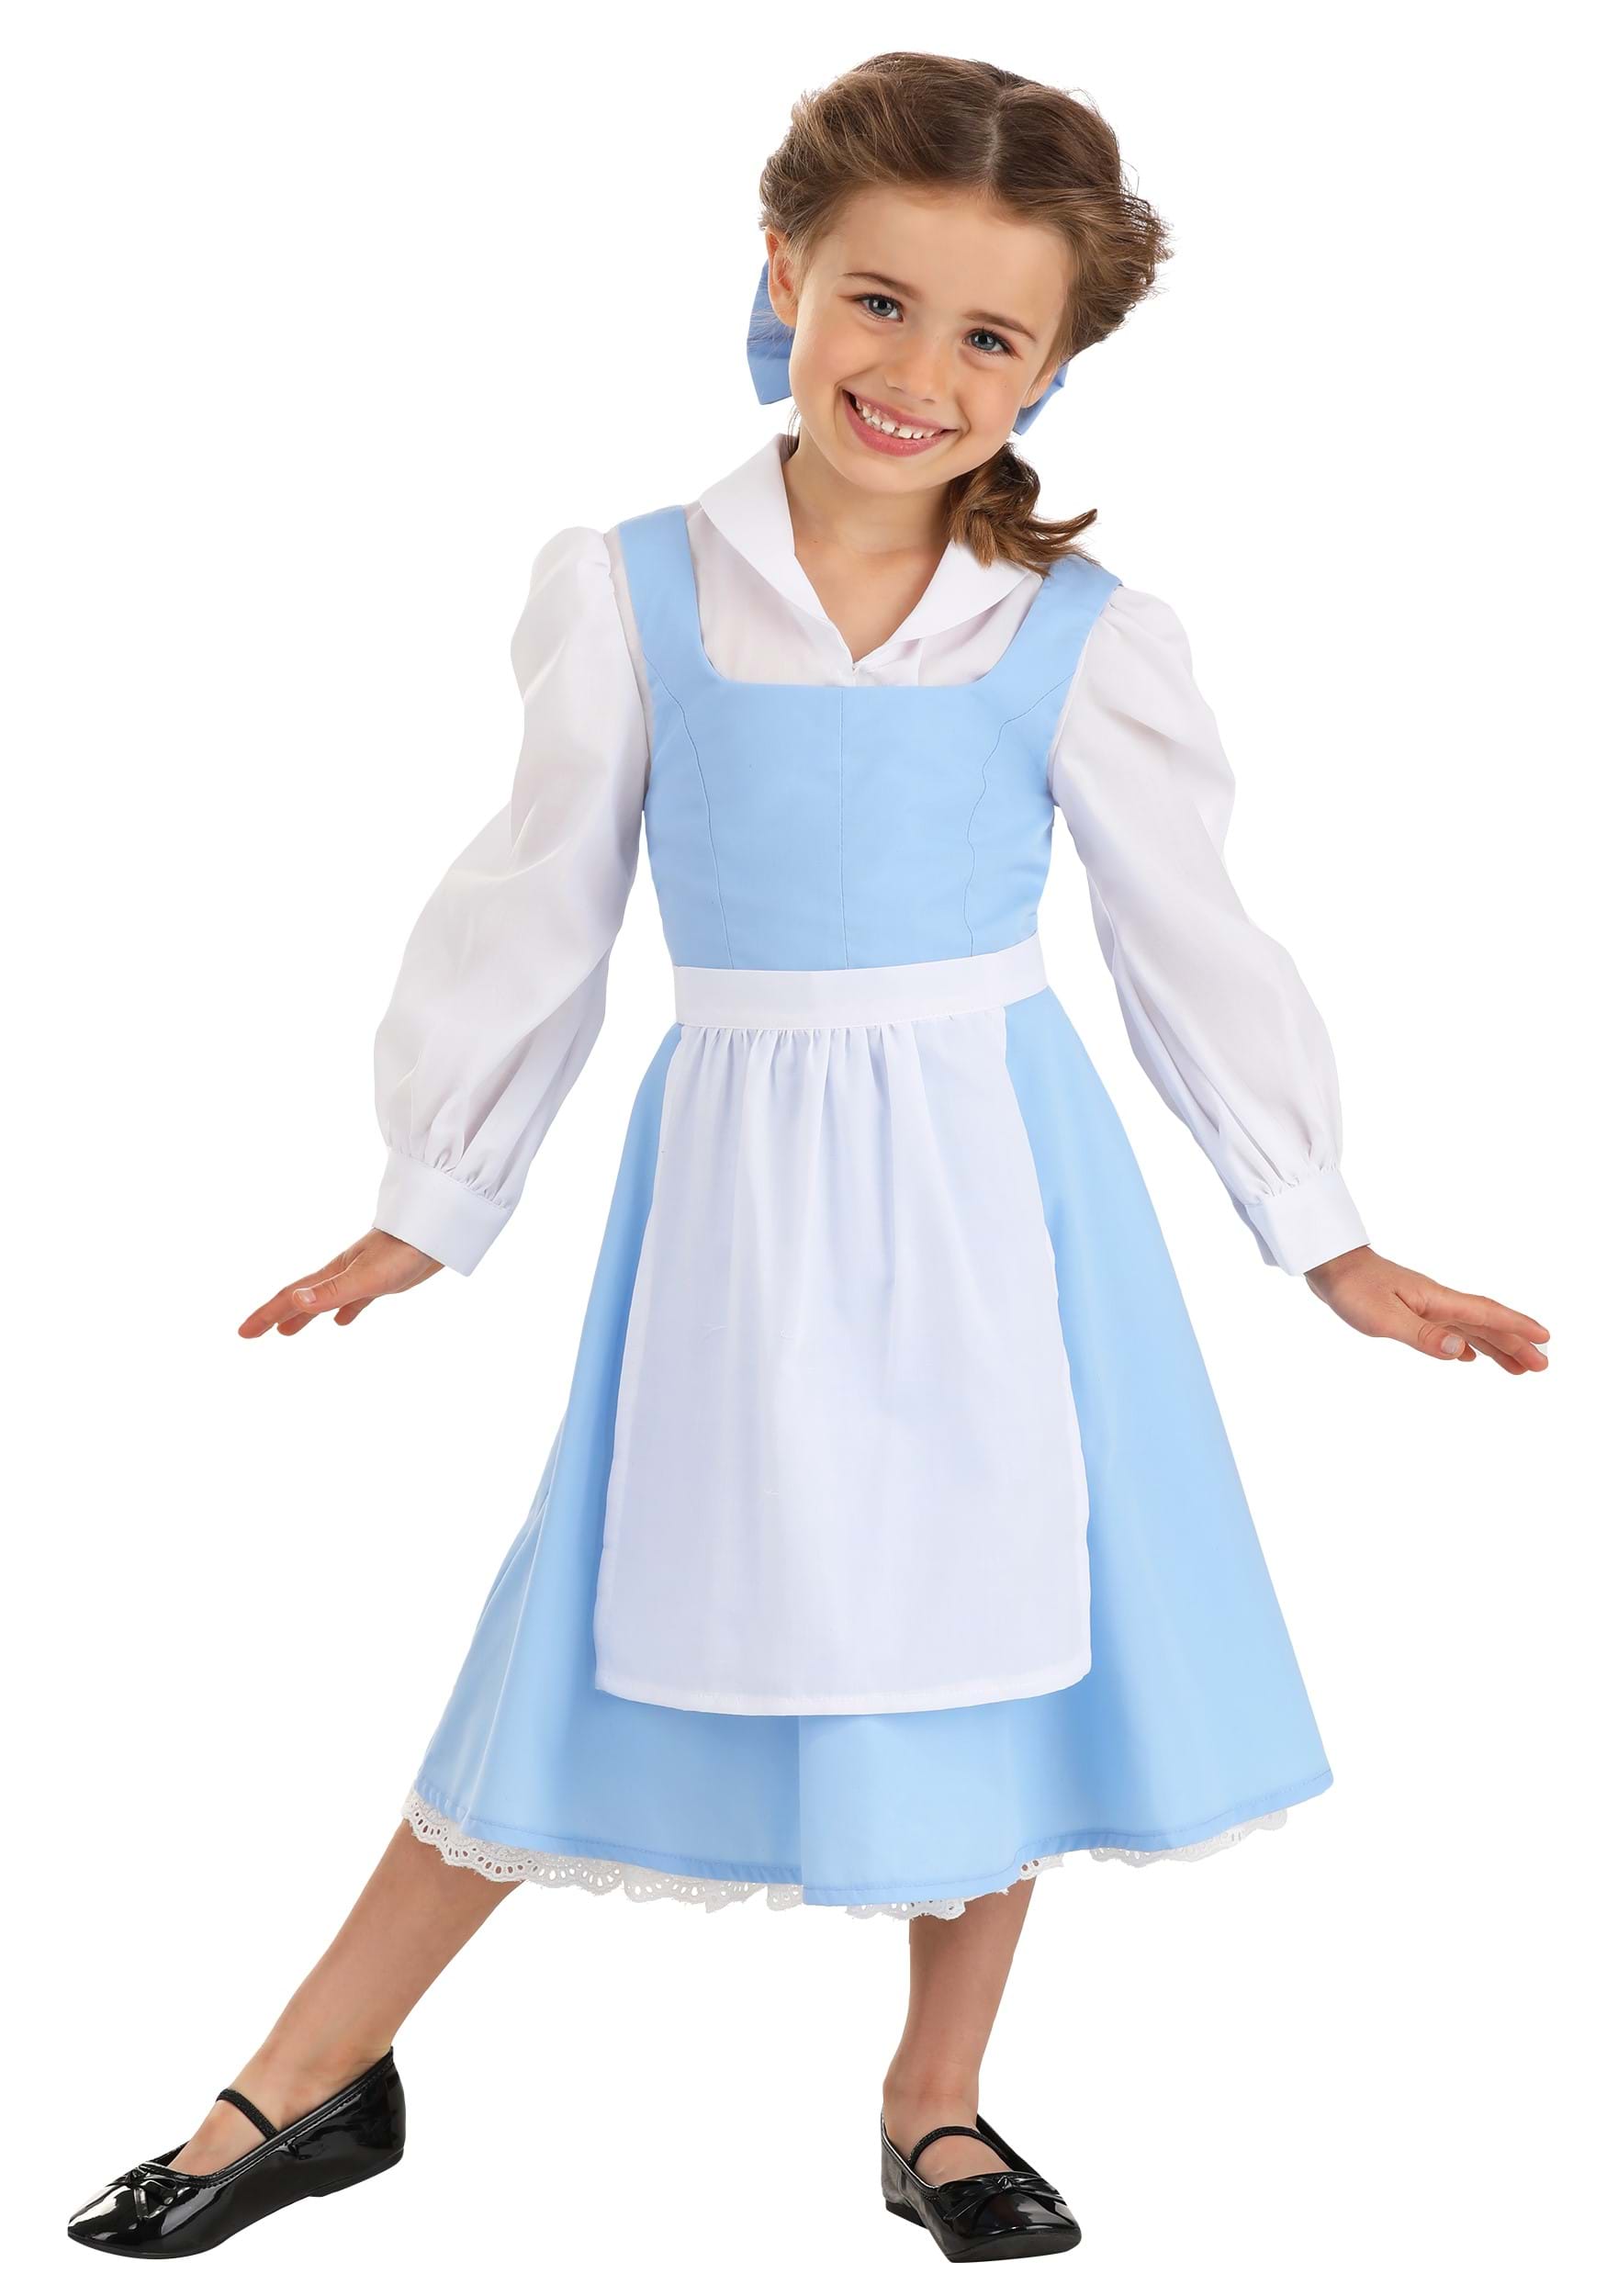 Photos - Fancy Dress Toddler FUN Costumes  Beauty and the Beast Belle Blue Costume Dress Blue 